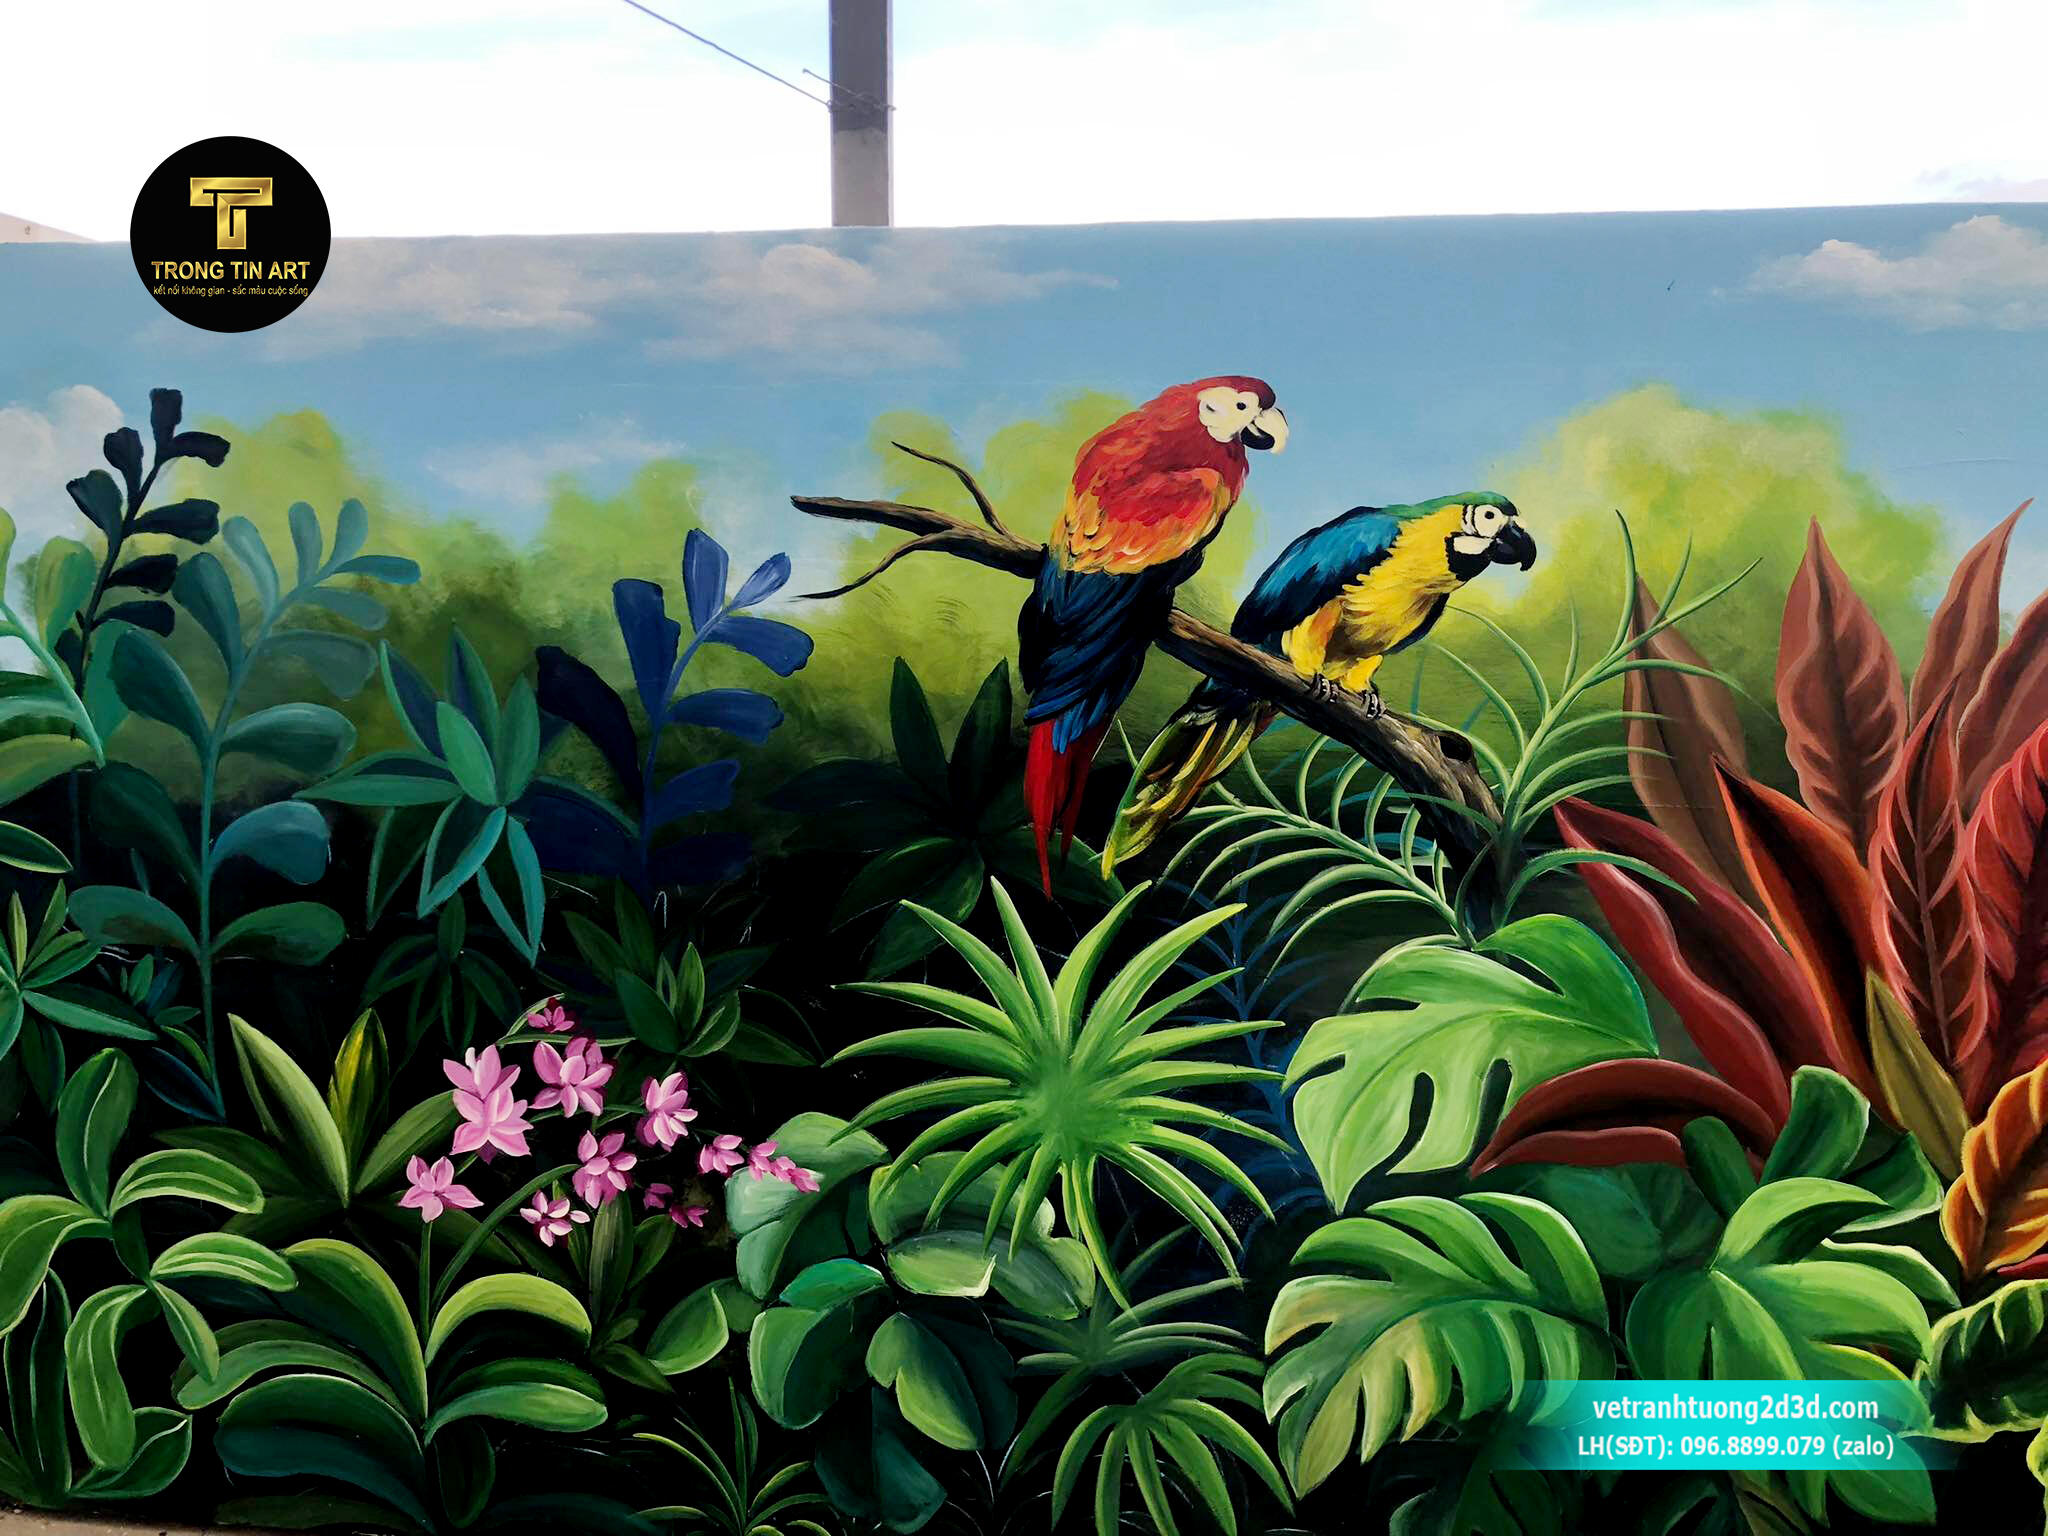 Admire the stunning tropical forest mural with vivid colors and lively depictions of trees and animals. The painting will undoubtedly provide you with a great experience and immerse you in the vast natural space.